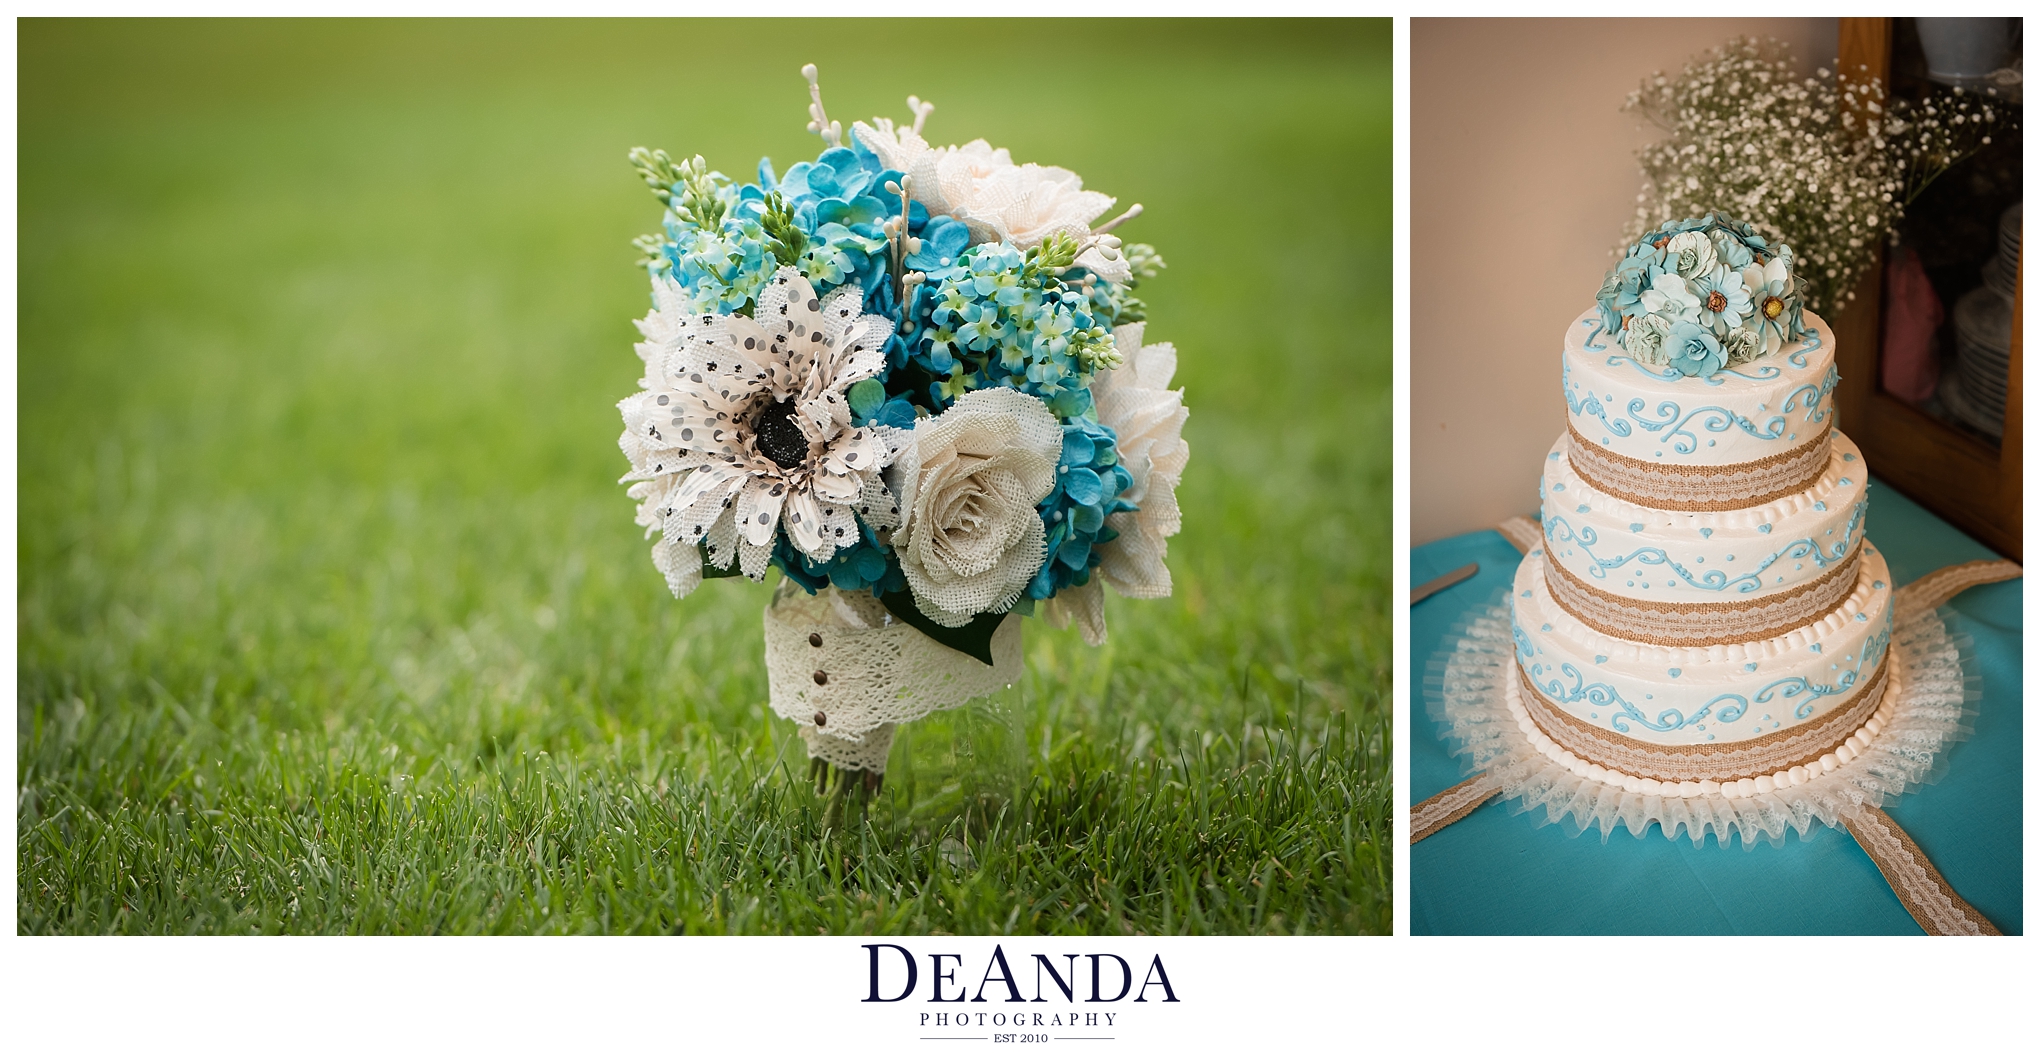 DIY bouquet of fabric flowers and wedding cake